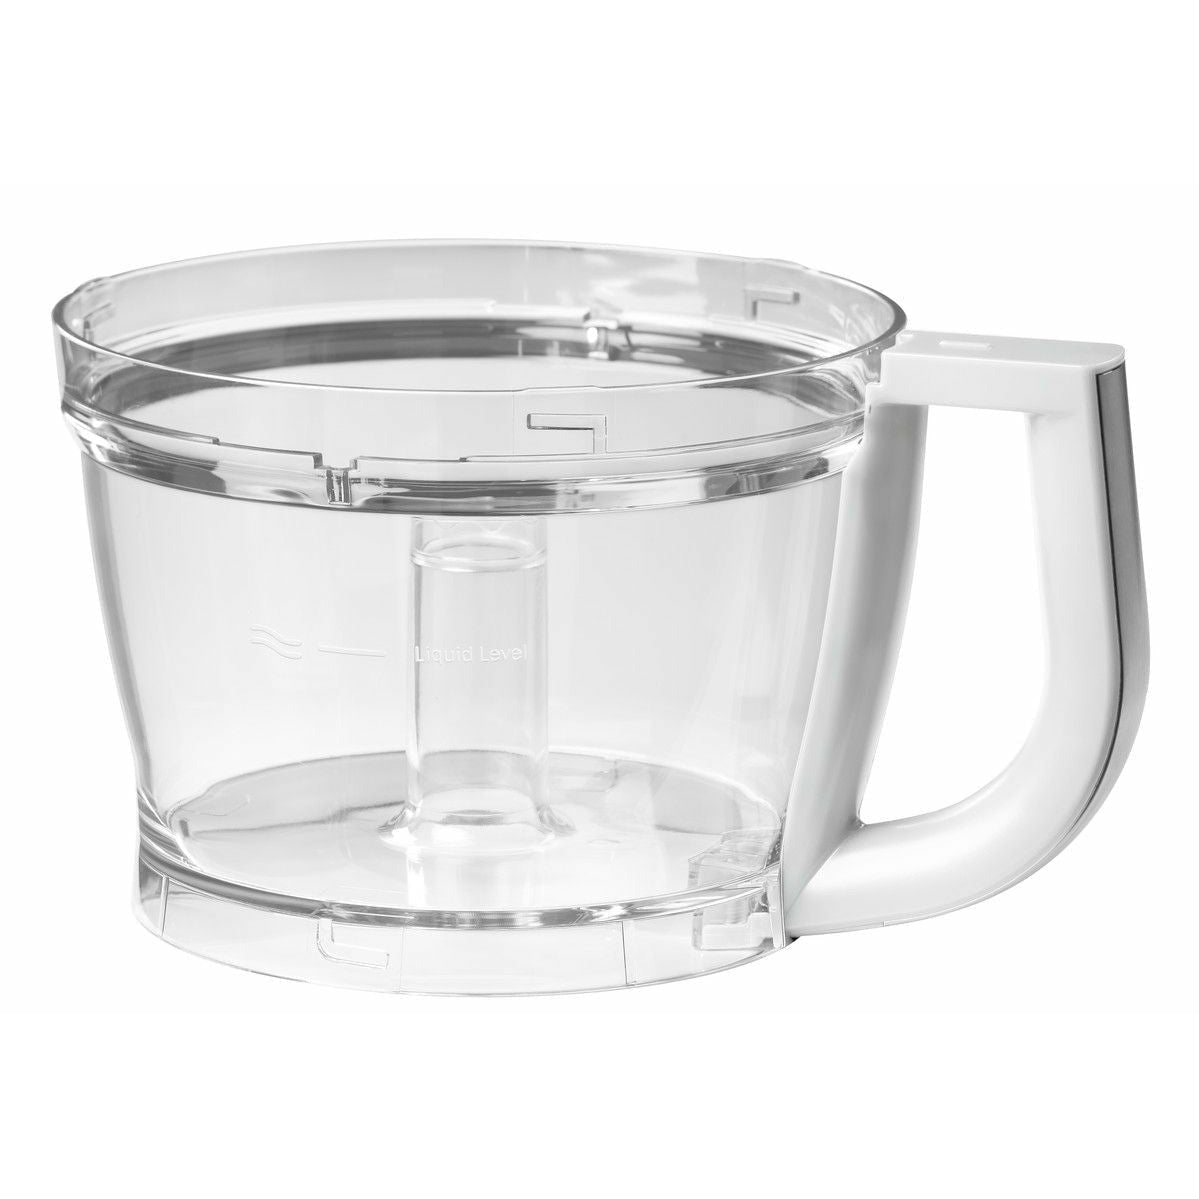 Kitchen Aid 5 KFP1325 Classic Food Prowector 3,1 L, blanc